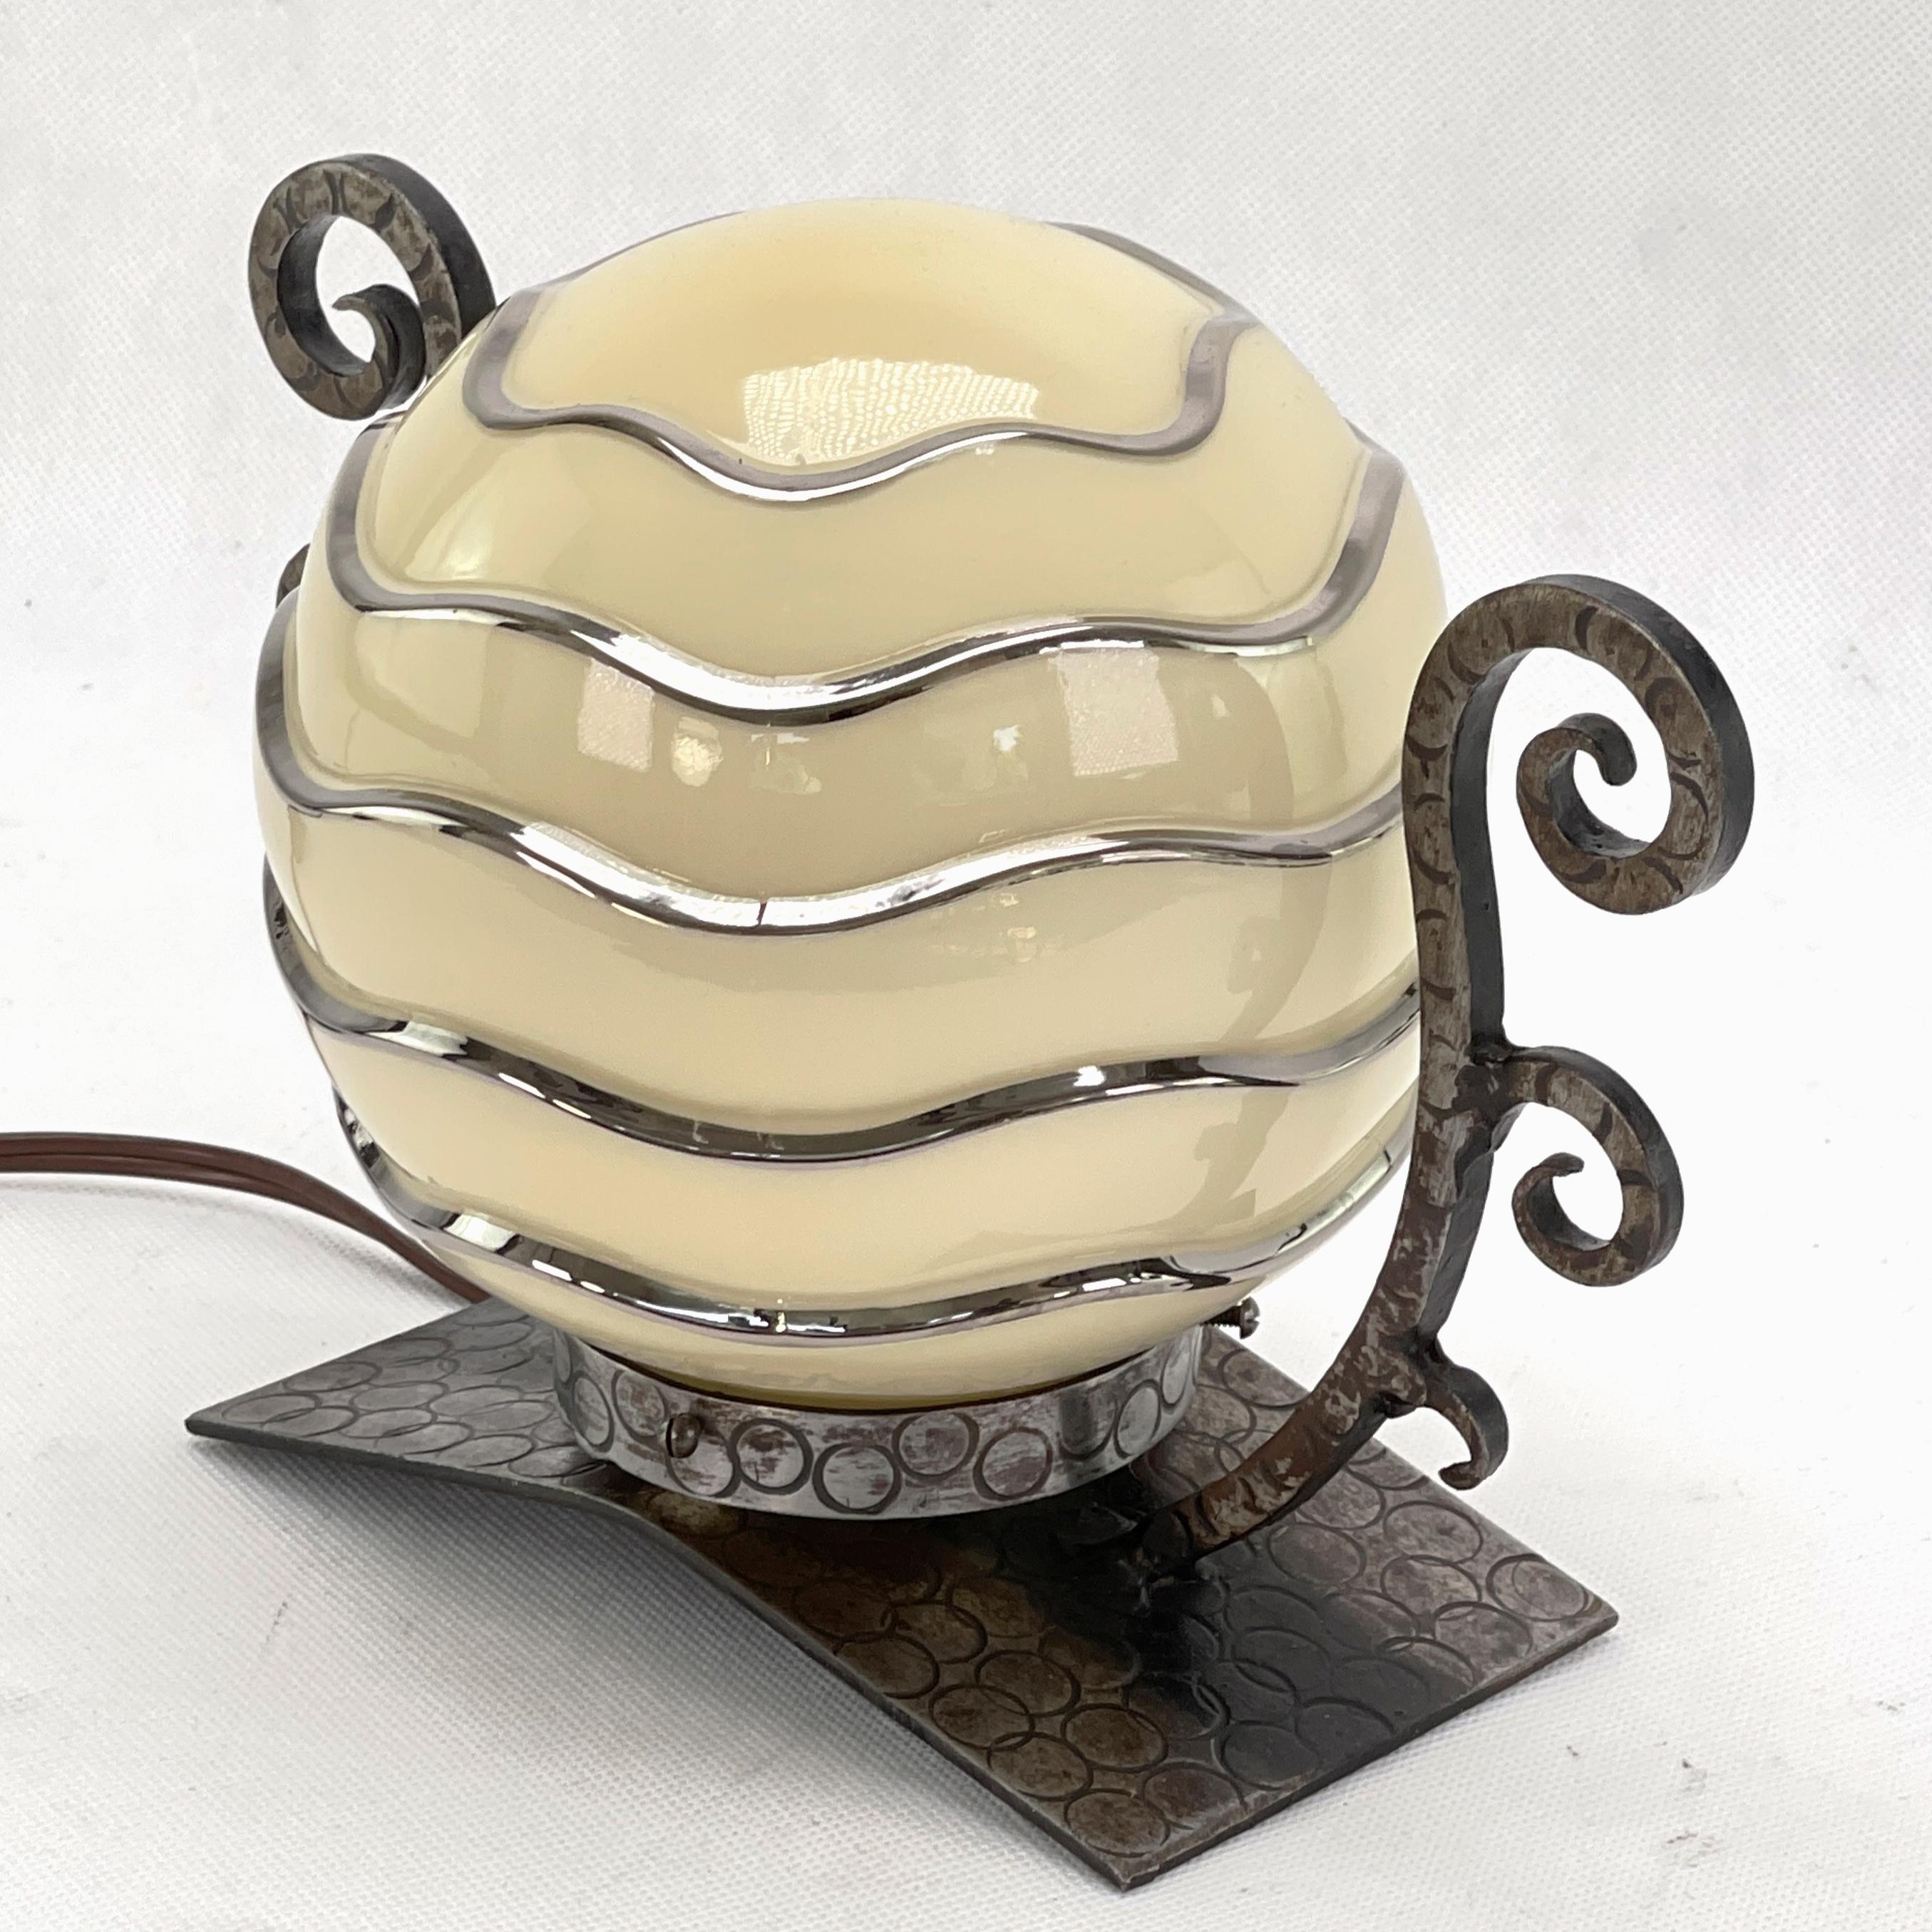 This original table lamp captivates with its simple and matter-of-fact Art Deco design. The decorative lamp gives a very pleasant light. This beautiful table lamp is an absolute design classic from the ART DECOS period. 

The lamp glass has a